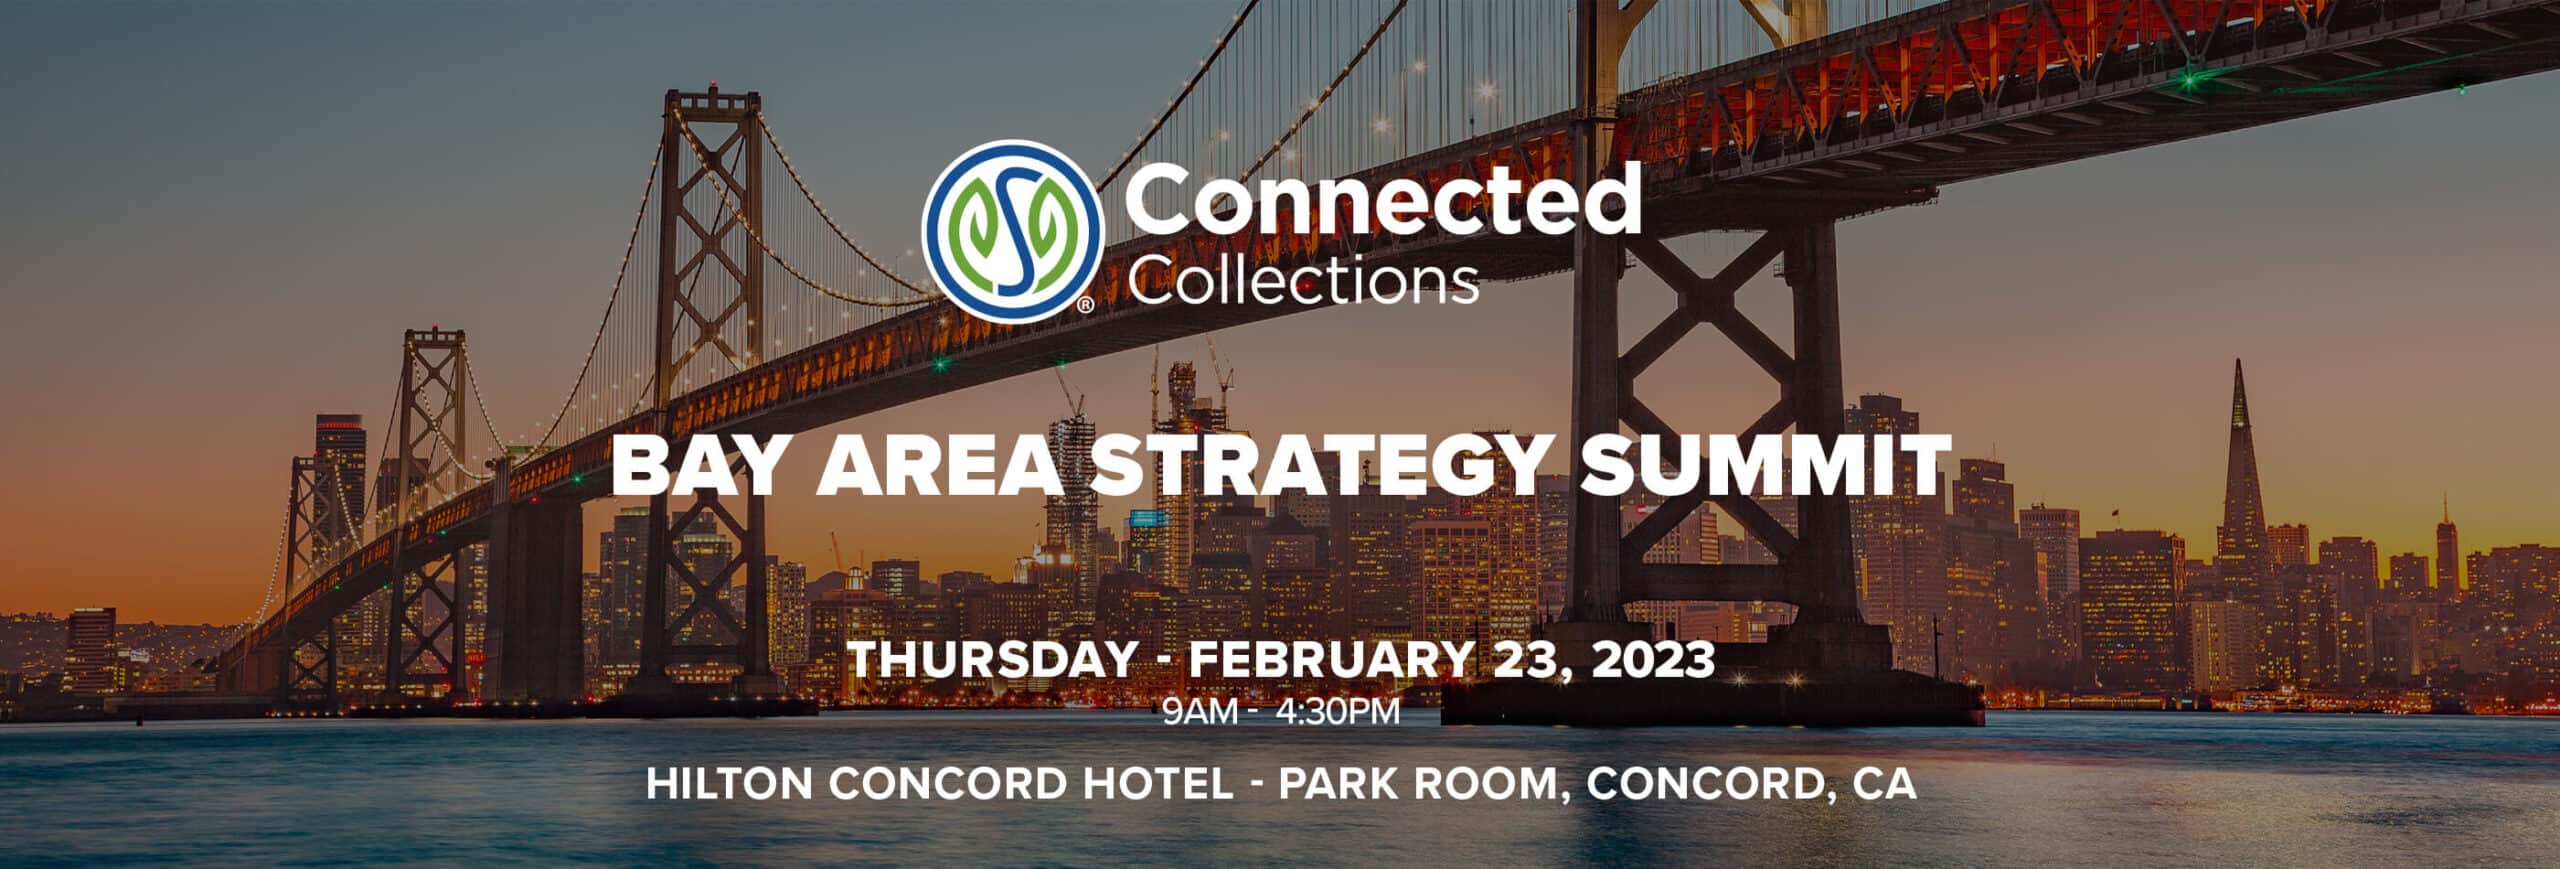 Connected Collections Bay Area Strategy Summit RSVP